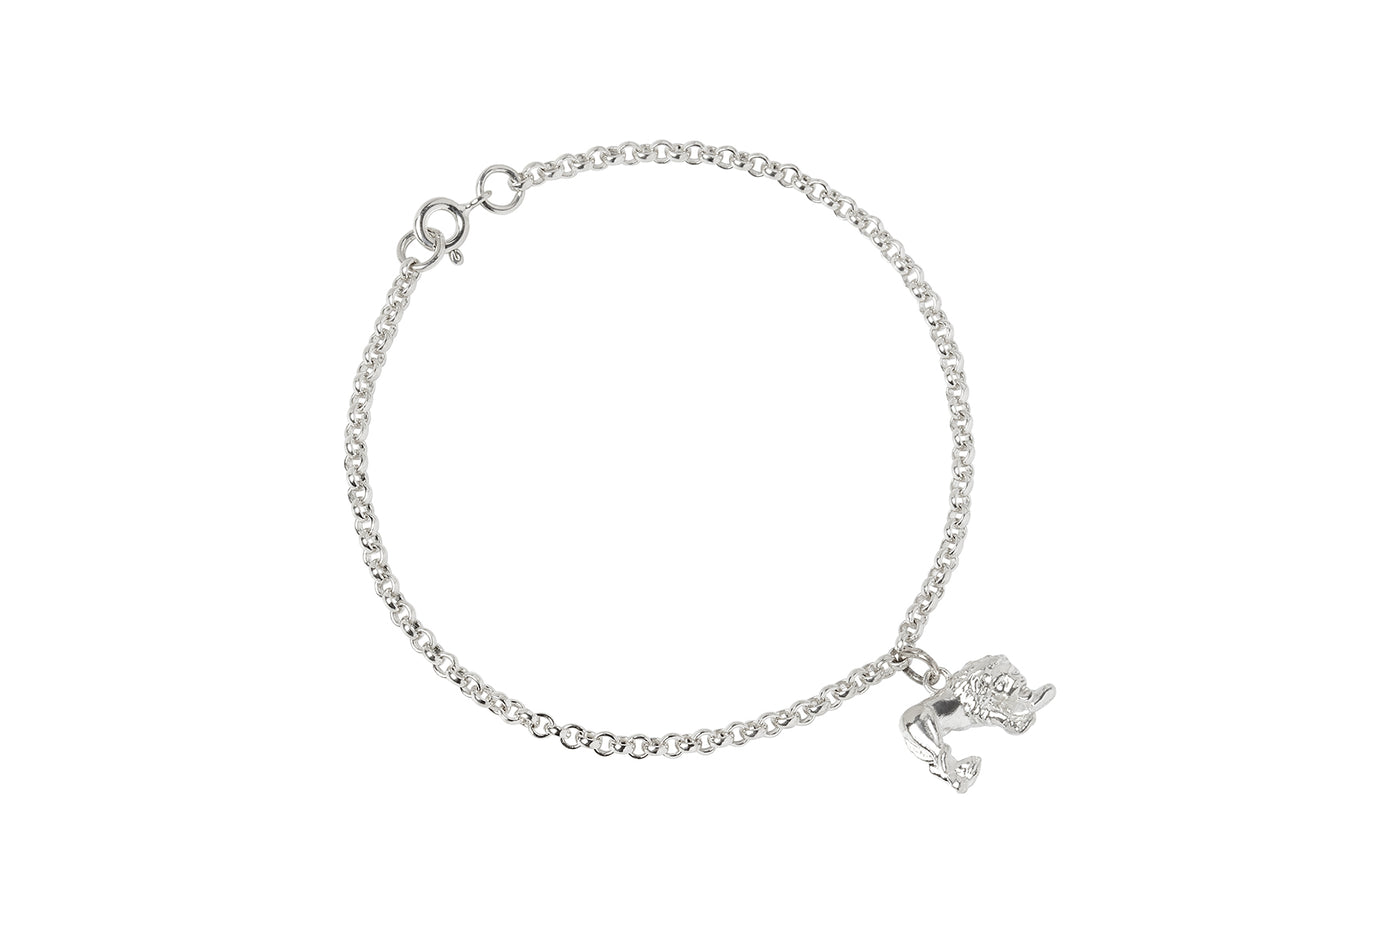 Silver belcher chain bracelet with silver Lion of Corbridge charm. Handcrafted jewellery made in Corbridge, Northumberland by Kirsty Taylor Goldsmiths